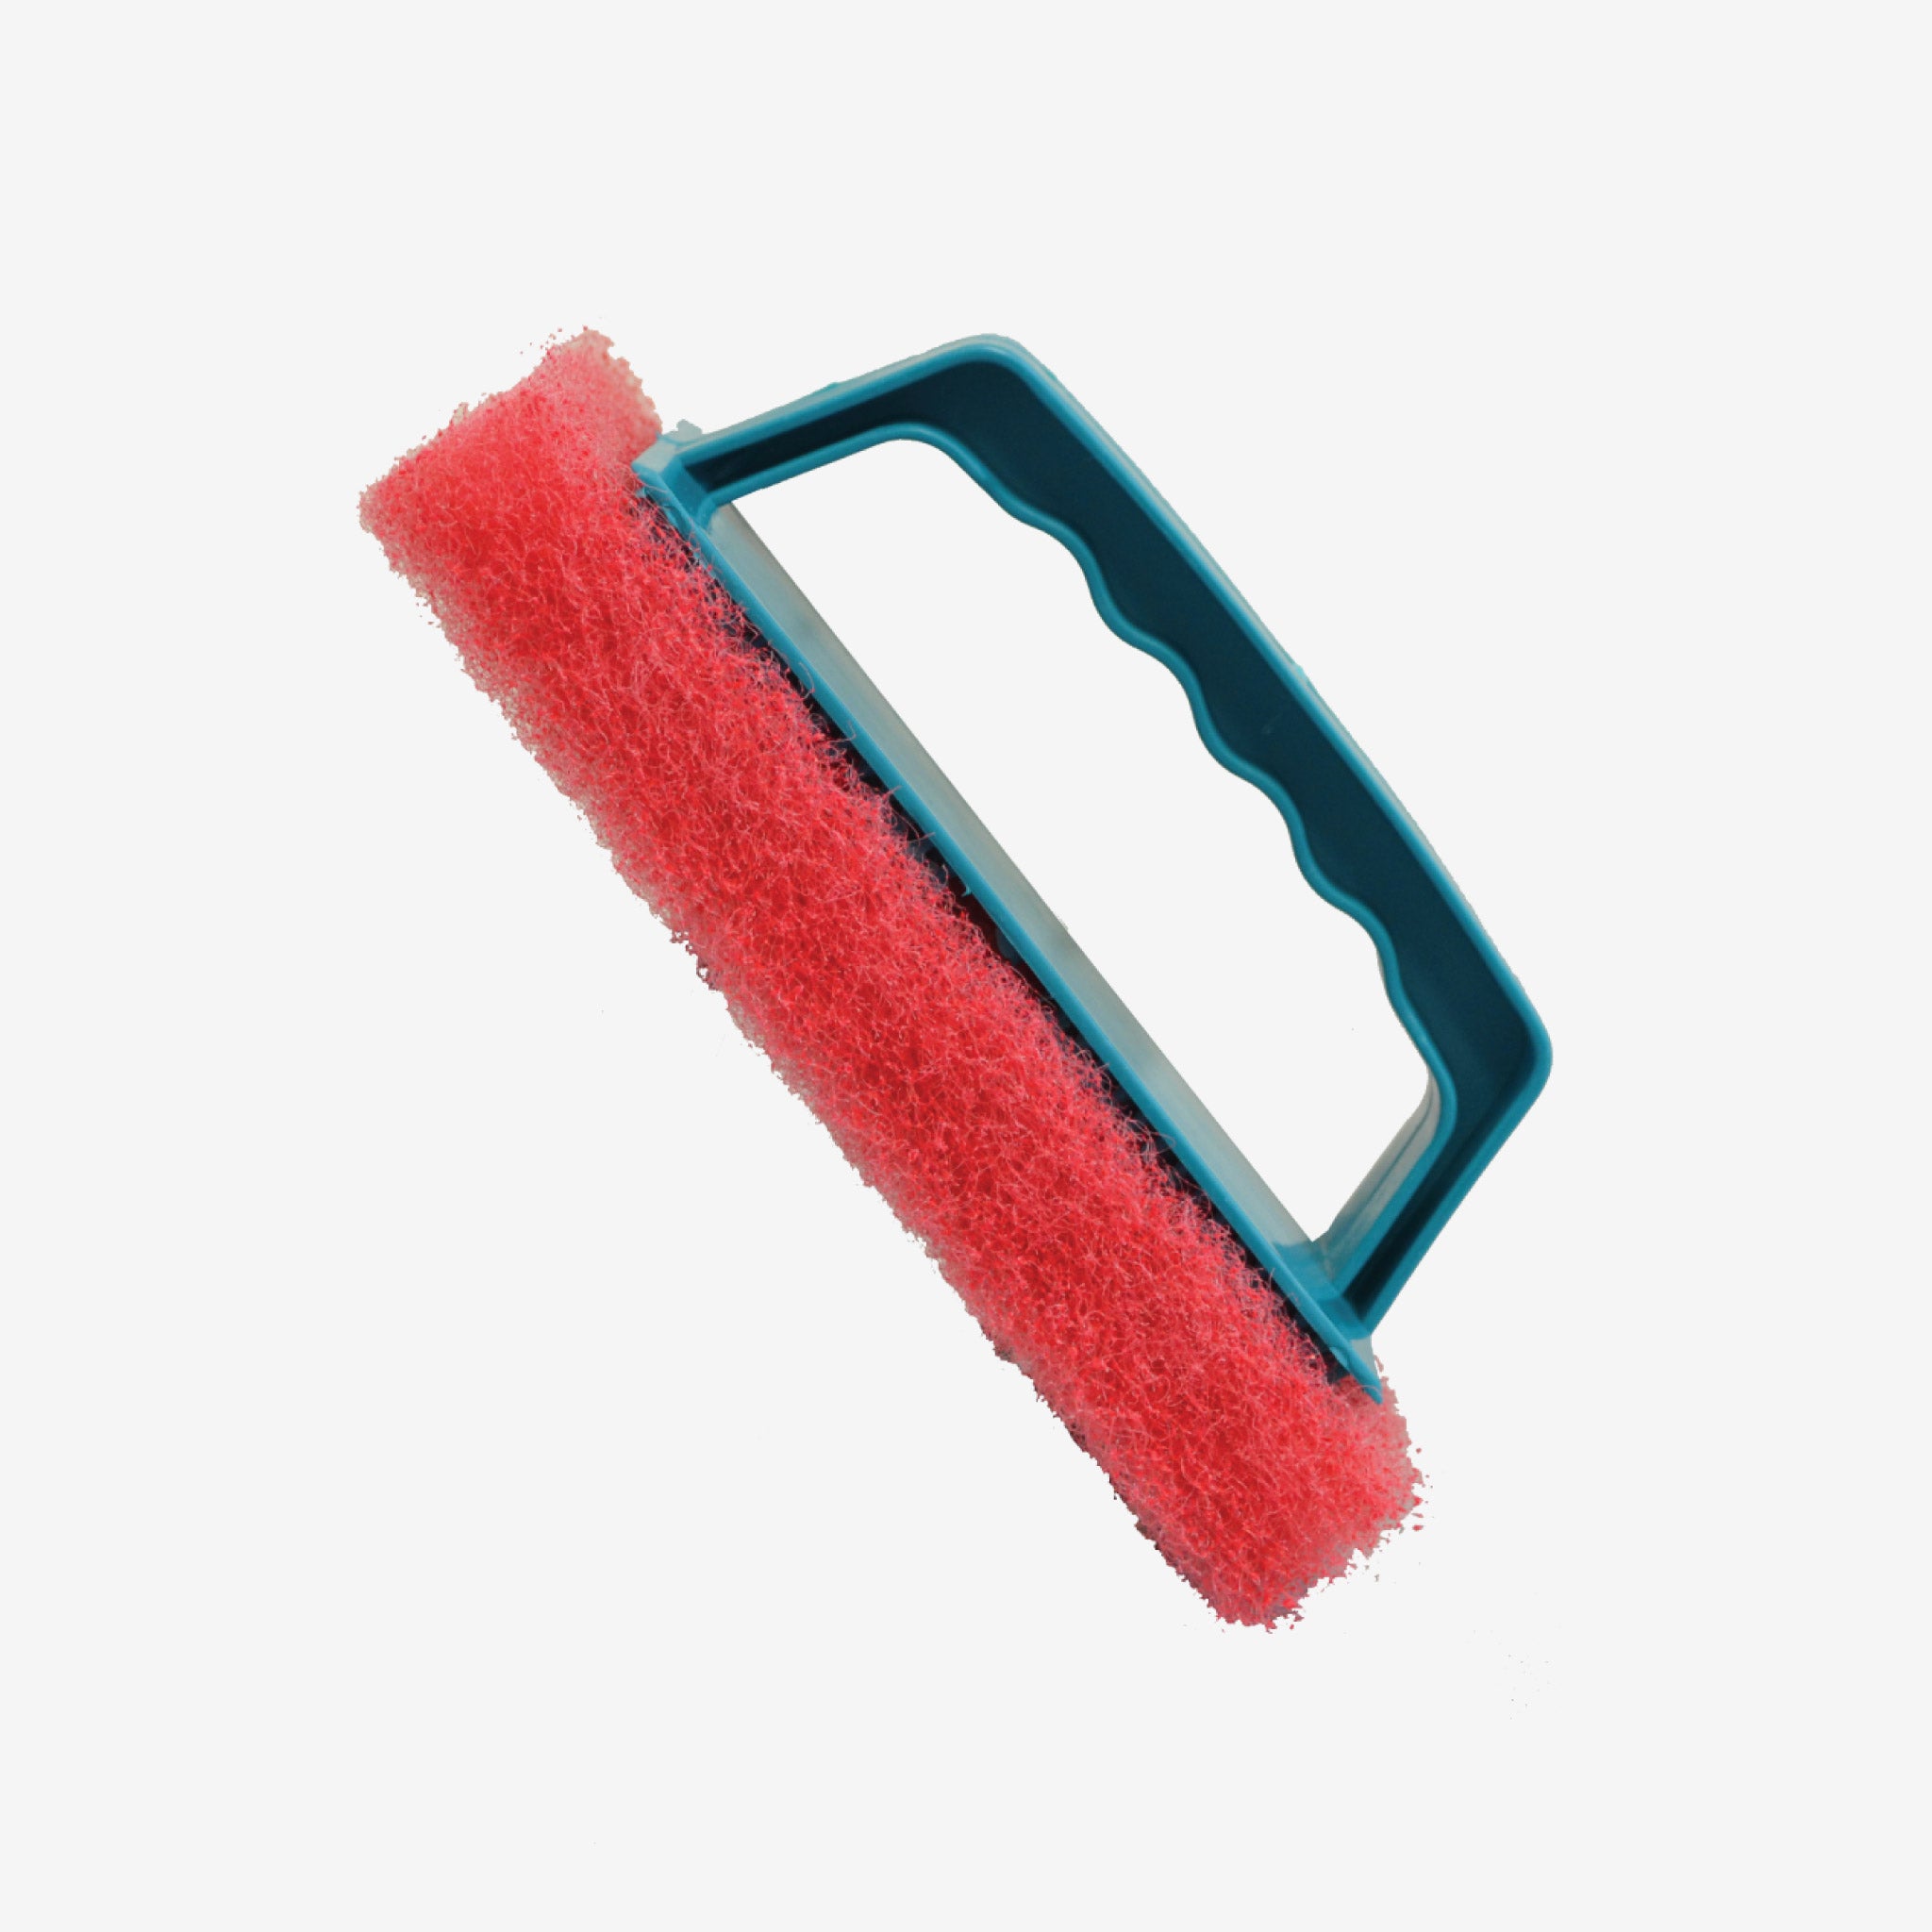 Red Scrub Pad (Red Pad Only)